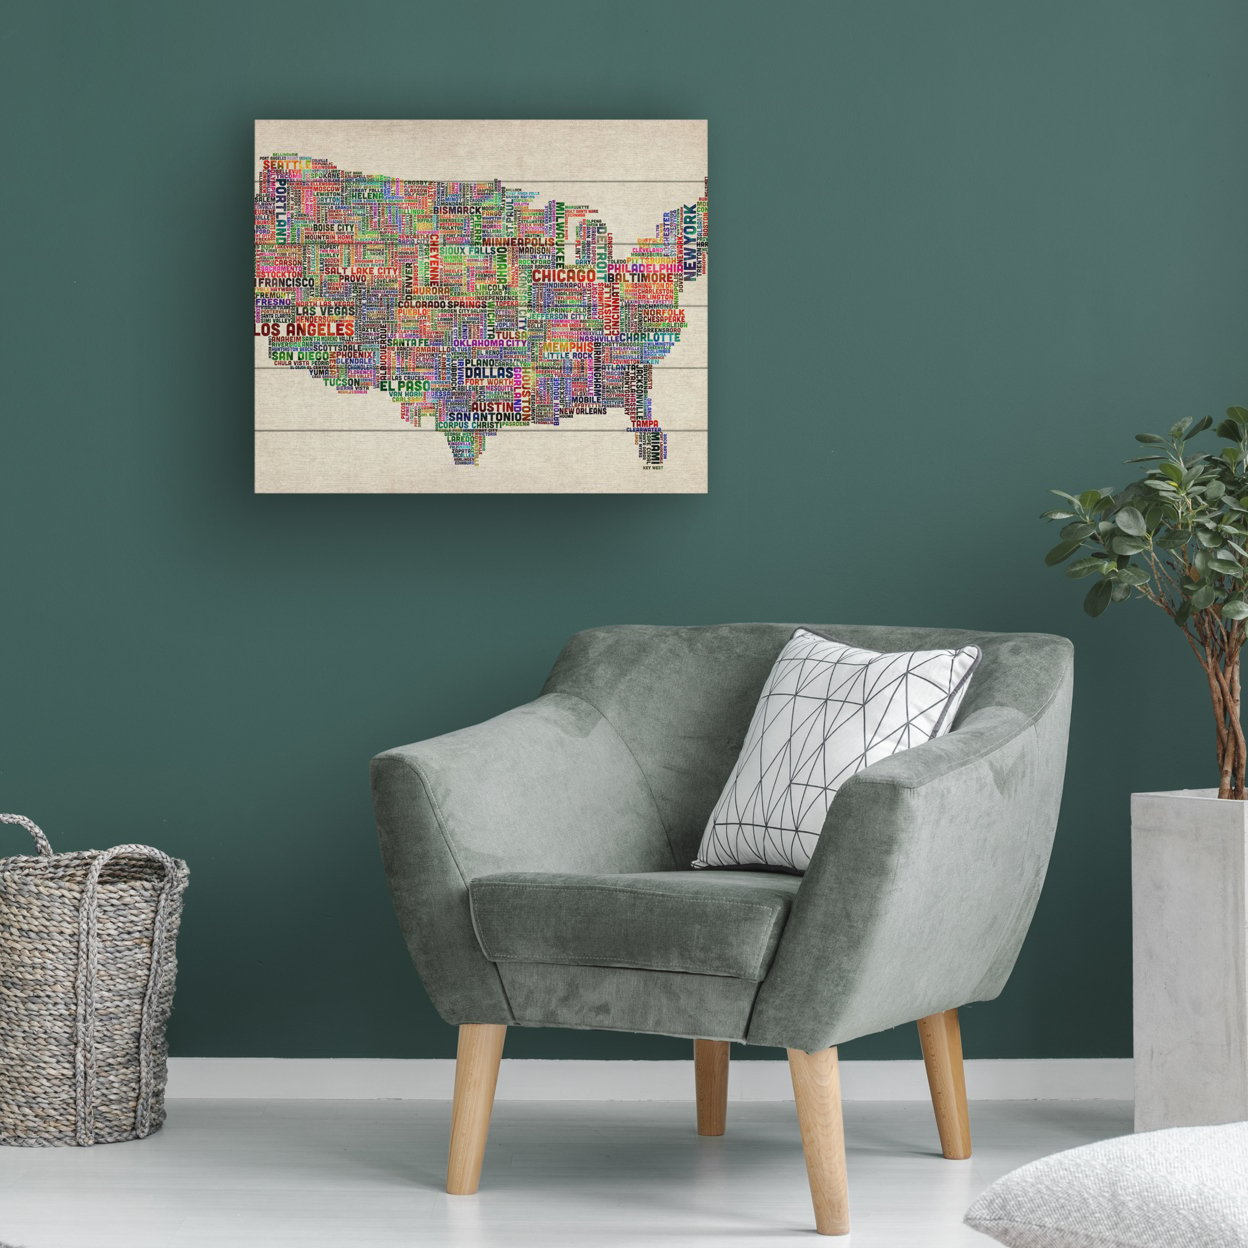 Wooden Slat Art 18 X 22 Inches Titled US Cities Text Map VI Ready To Hang Home Decor Picture